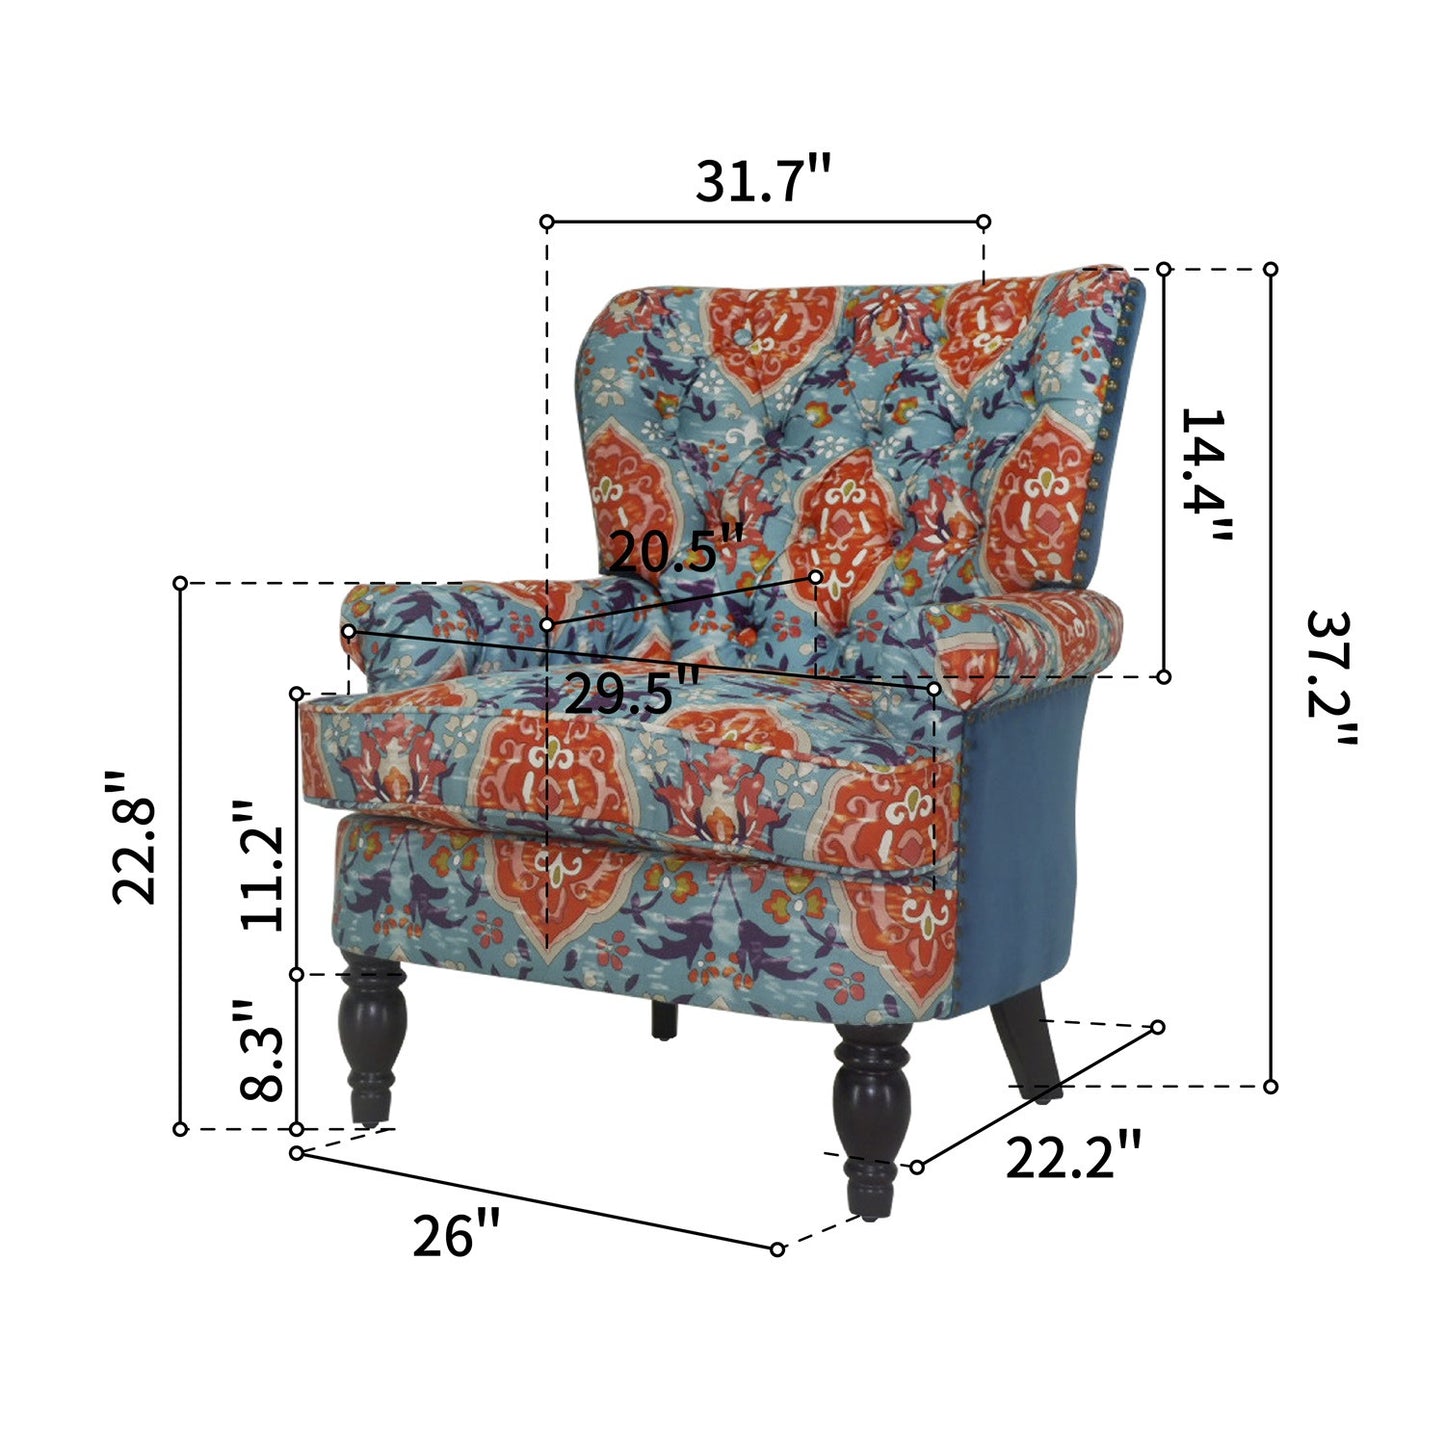 33" Teal Blue And Orange Brown Damask Wingback Chair